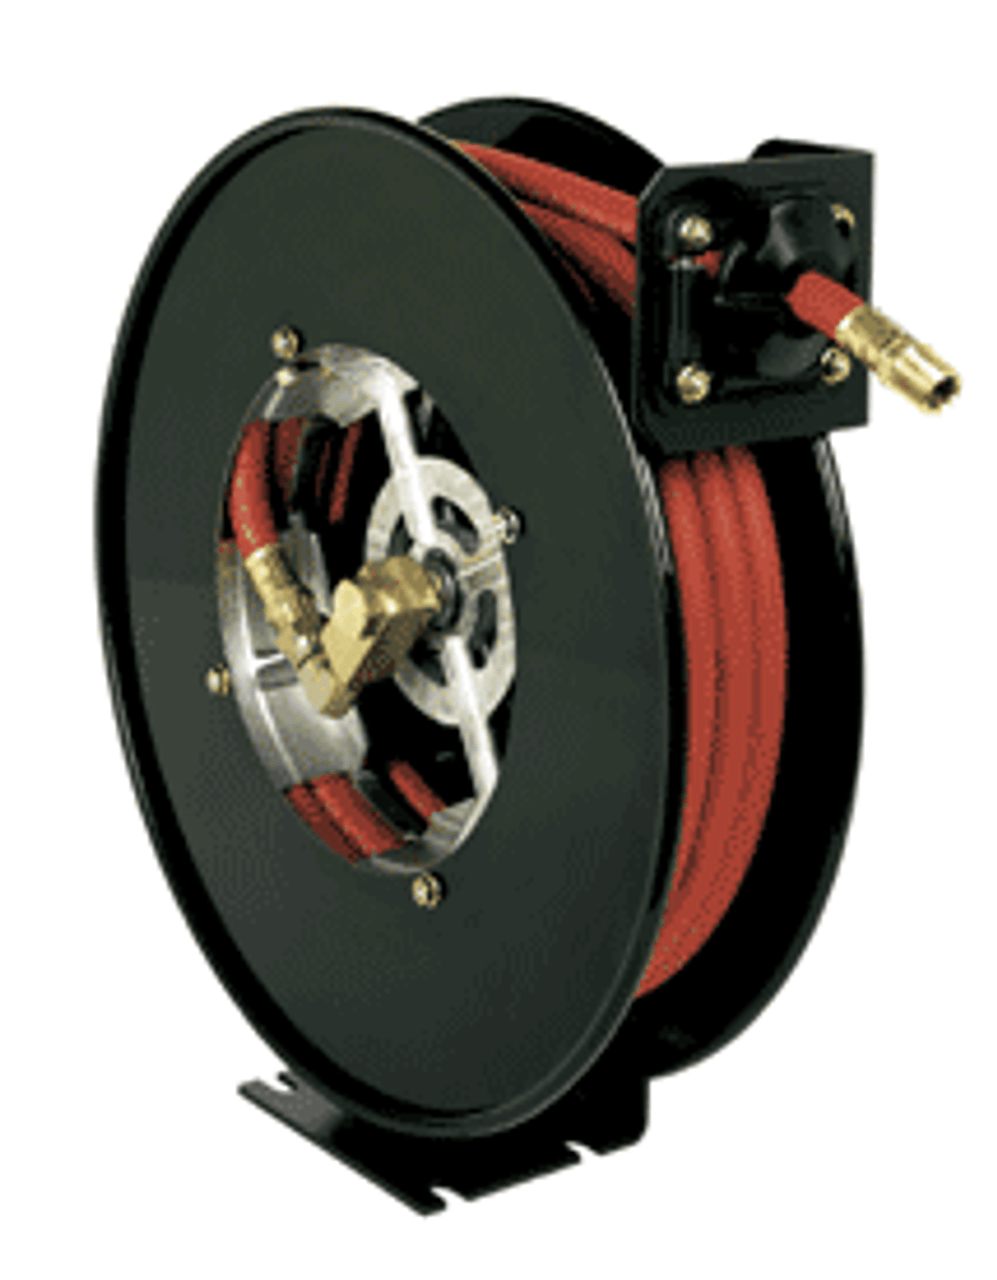 Hosetract UTL-350 3/8 x 50 Water/Air Hose Reel - MADE IN USA